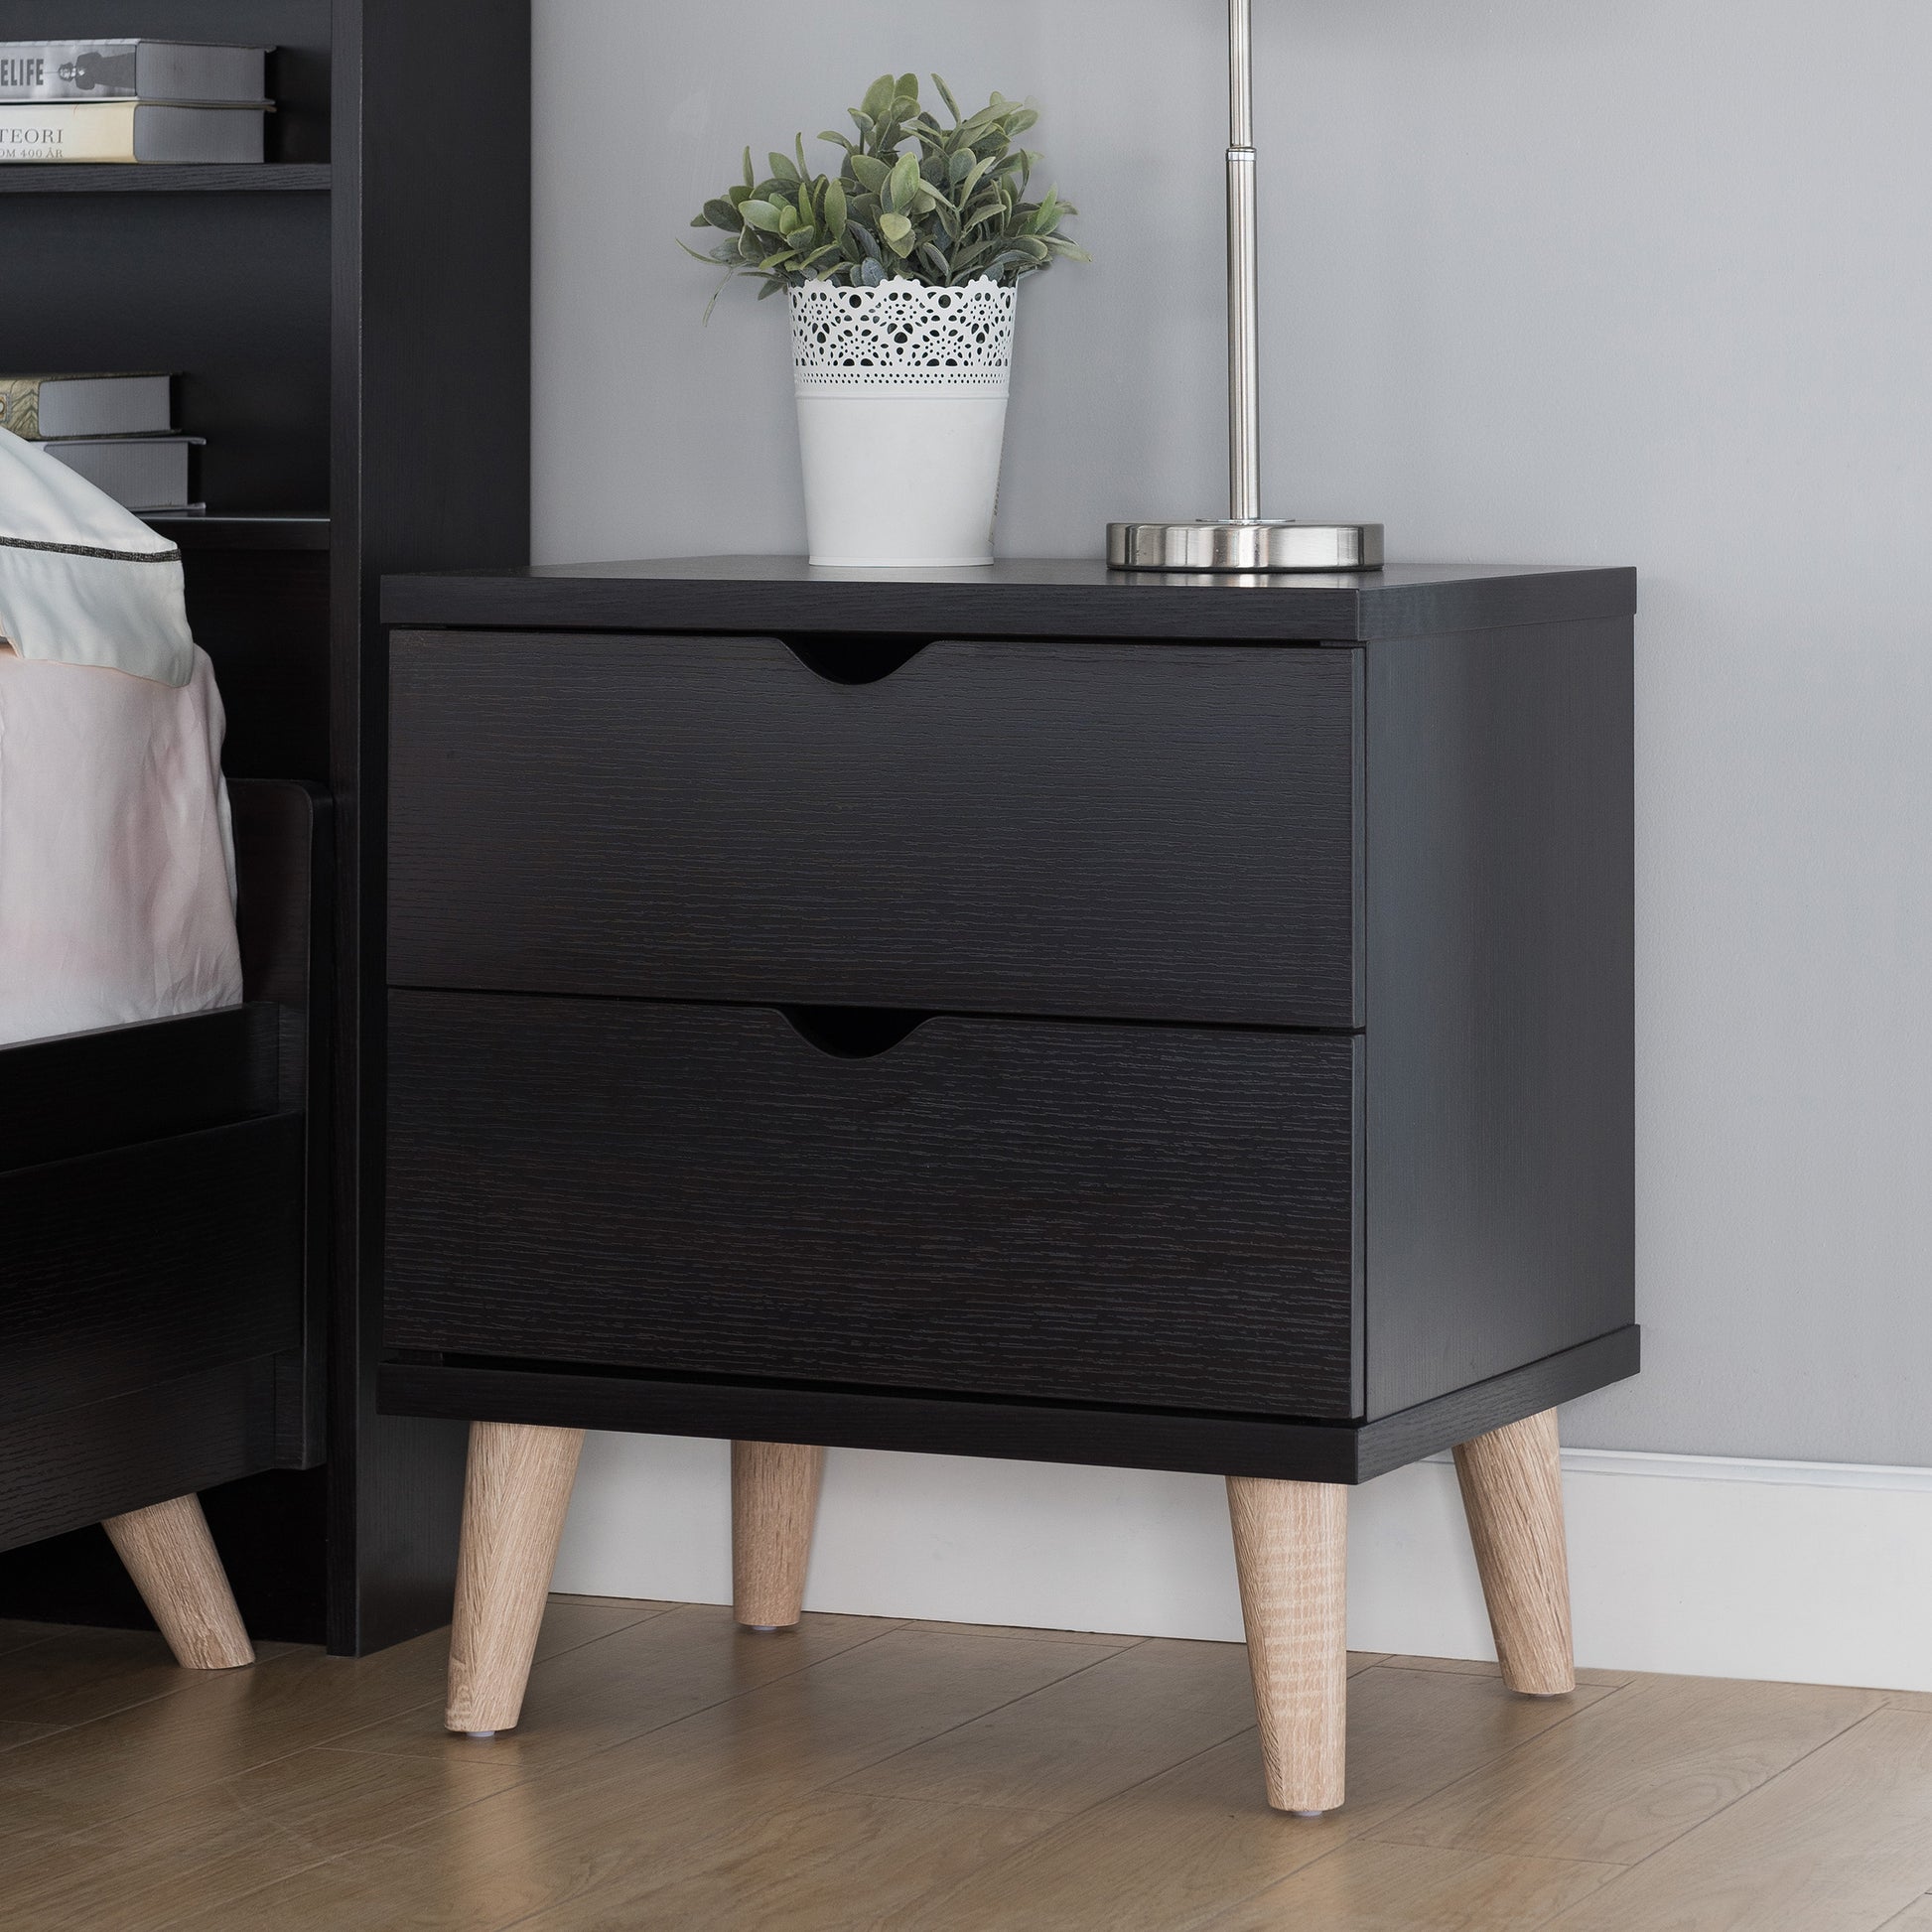 Left angled mid-century modern cappuccino two-drawer nightstand in a bedroom with accessories